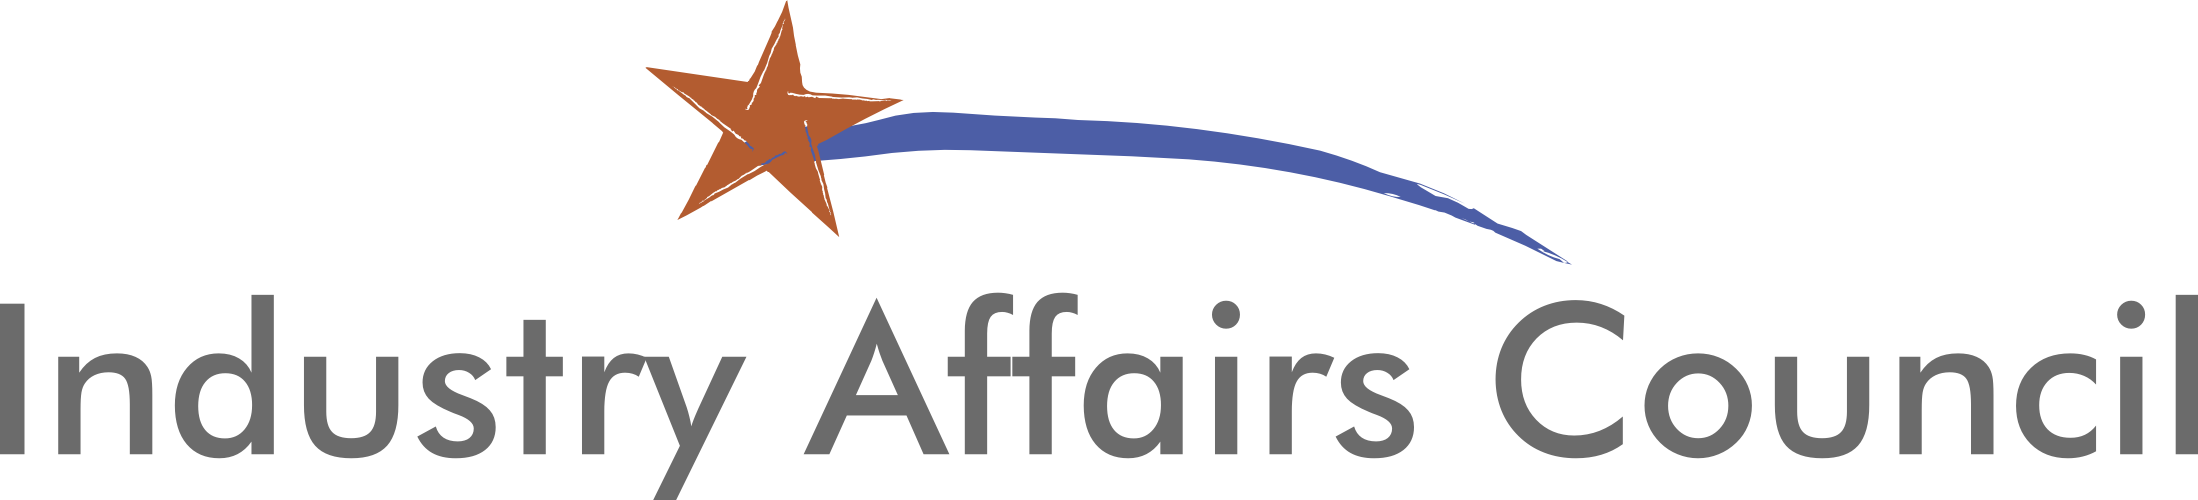 Industry Affairs Council 